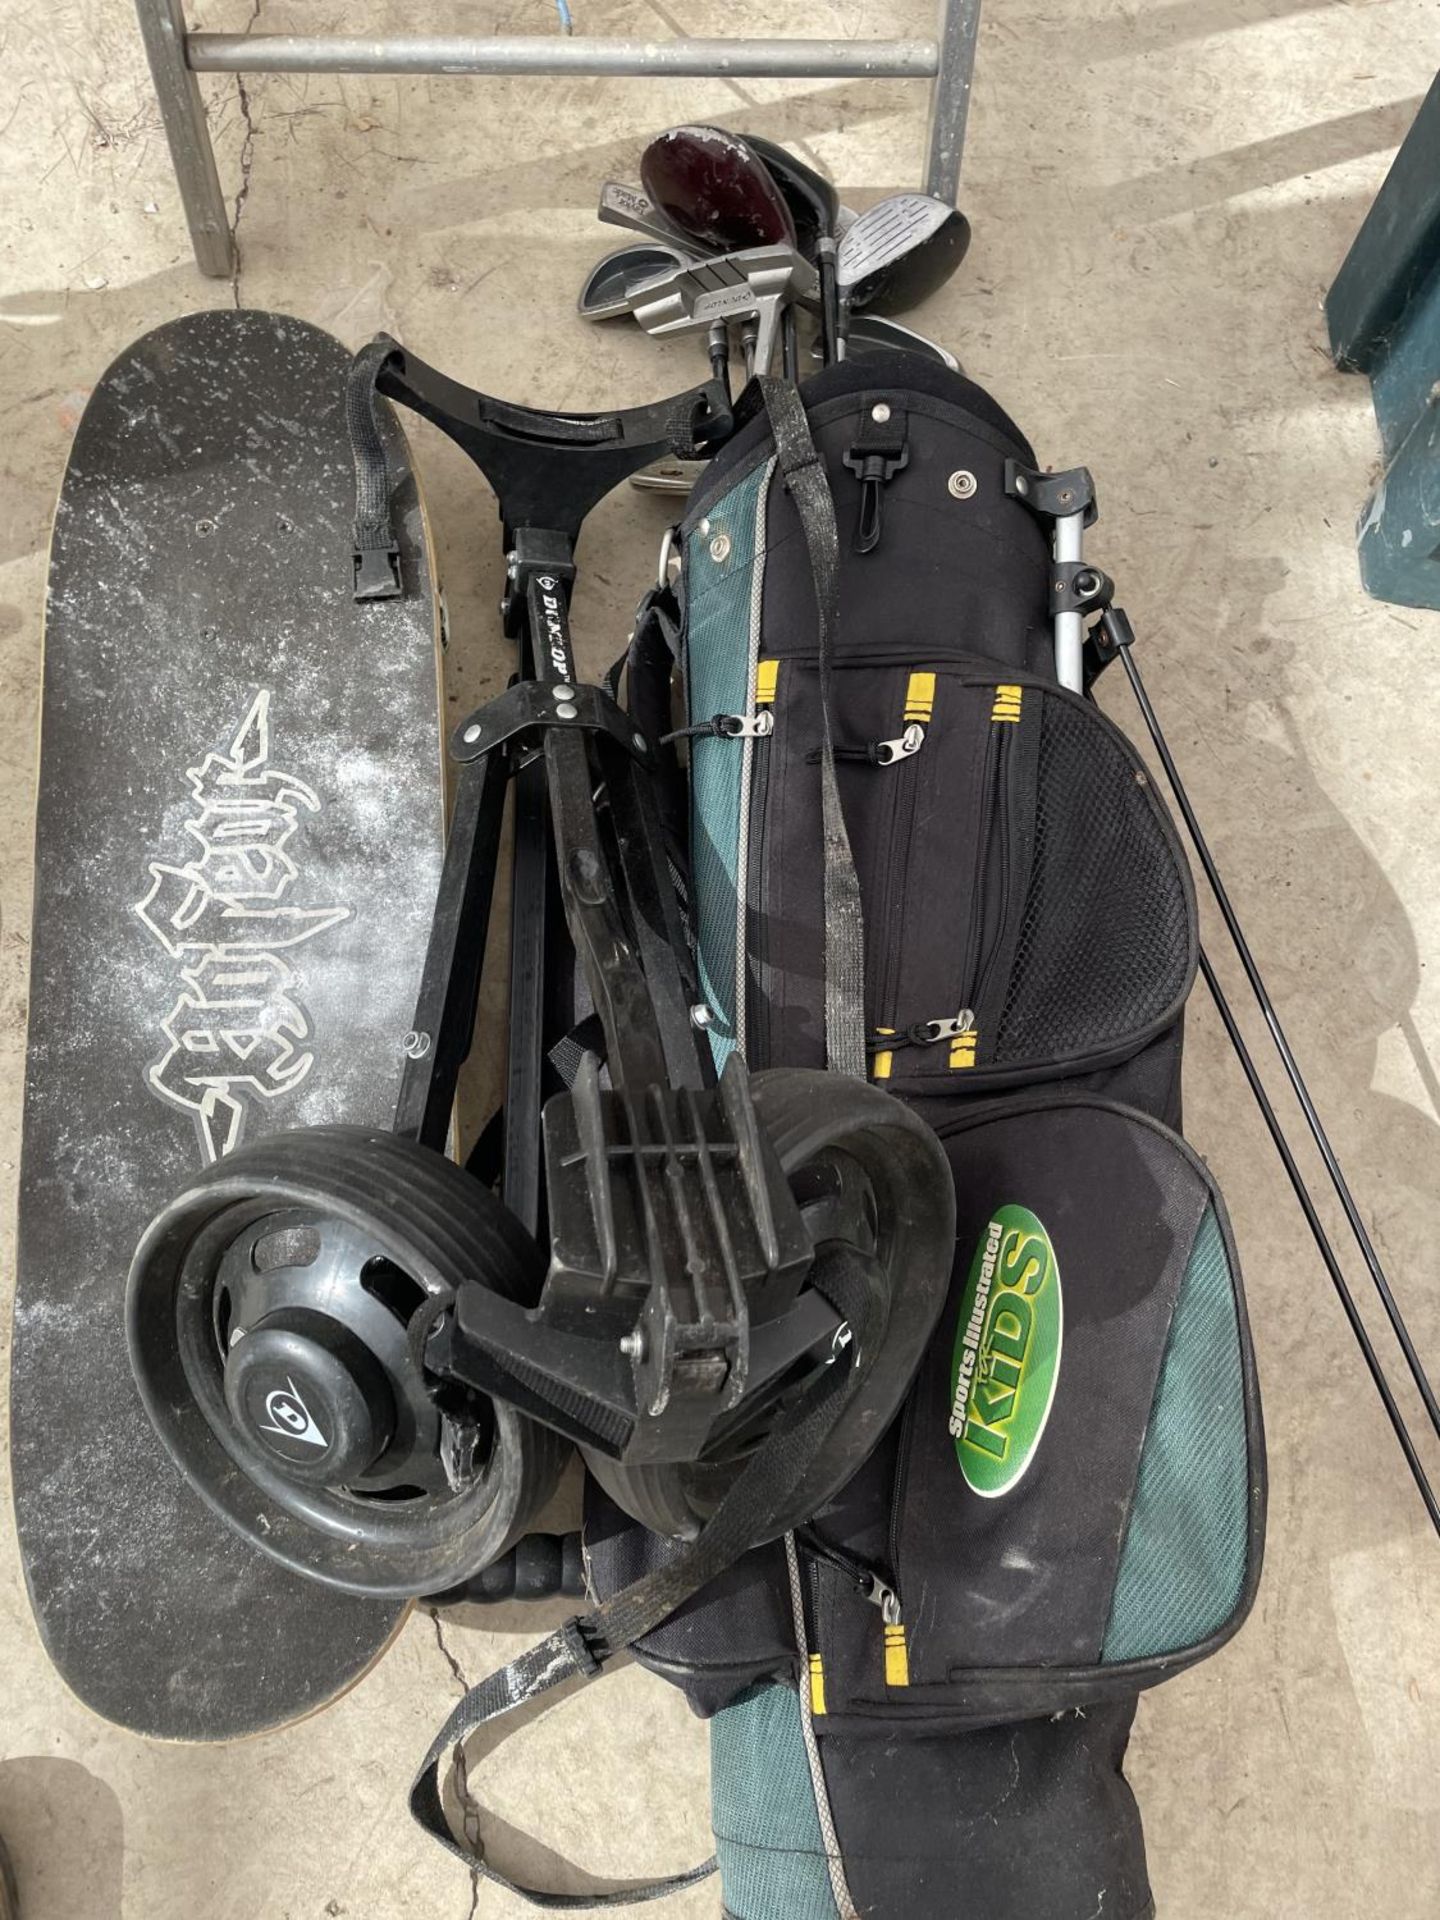 A SET OF CHILDRENS GOLF CLUBS A GOLF TROLLEY AND A SKATE BOARD - Image 2 of 2